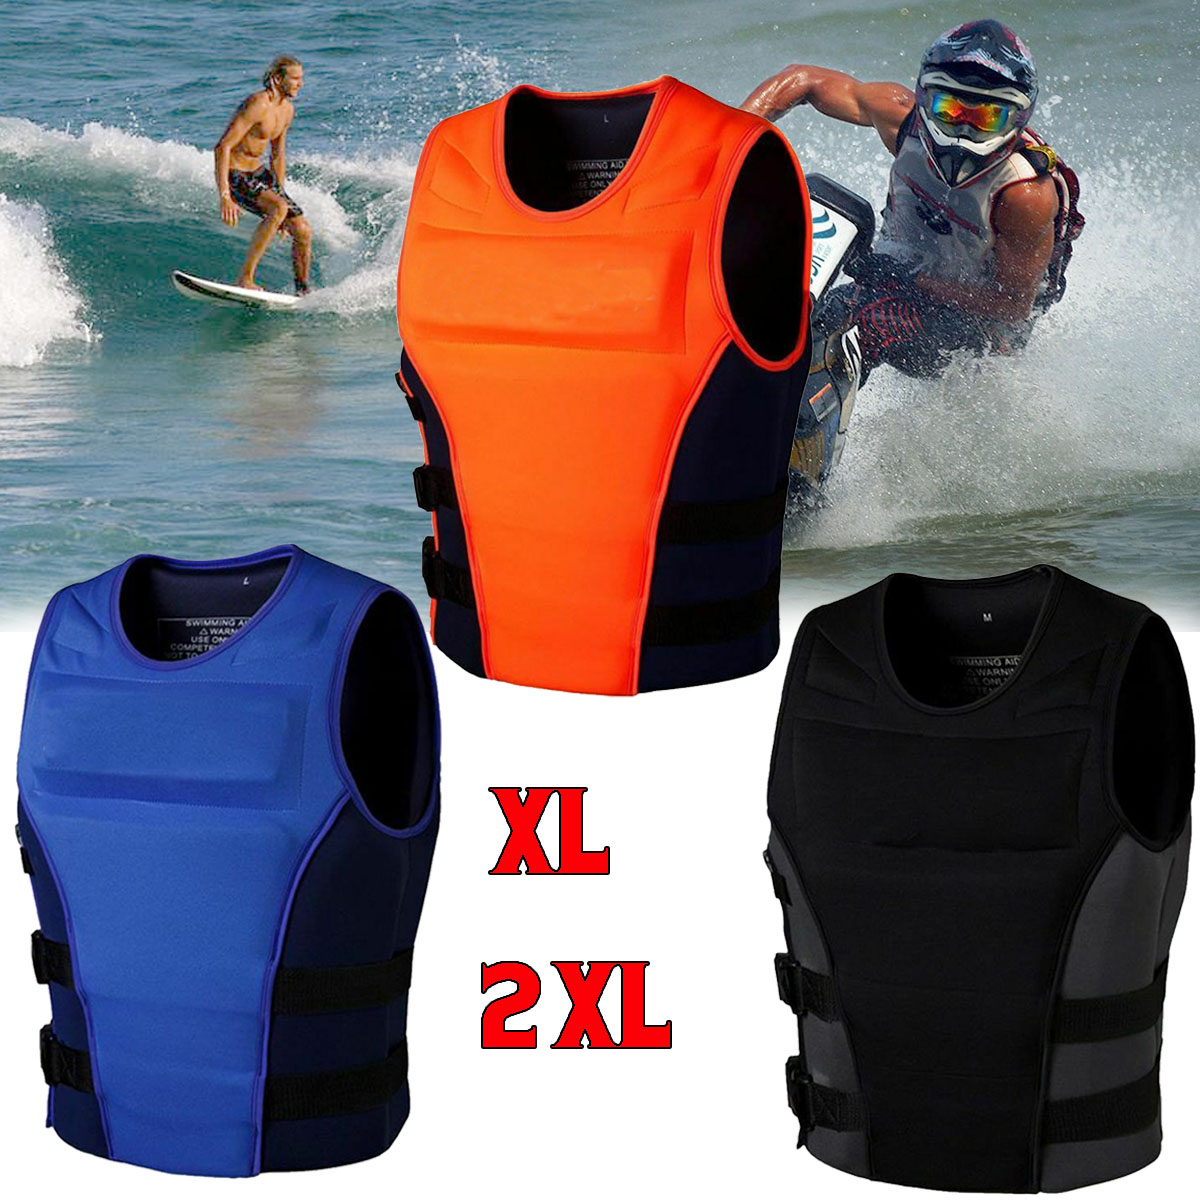 Outdoor-Rafting-Life-Jacket-for-Adult-Swimming-Snorkeling-Wear-Professional-Surfing-Aid-Life-Vest-1748600-2